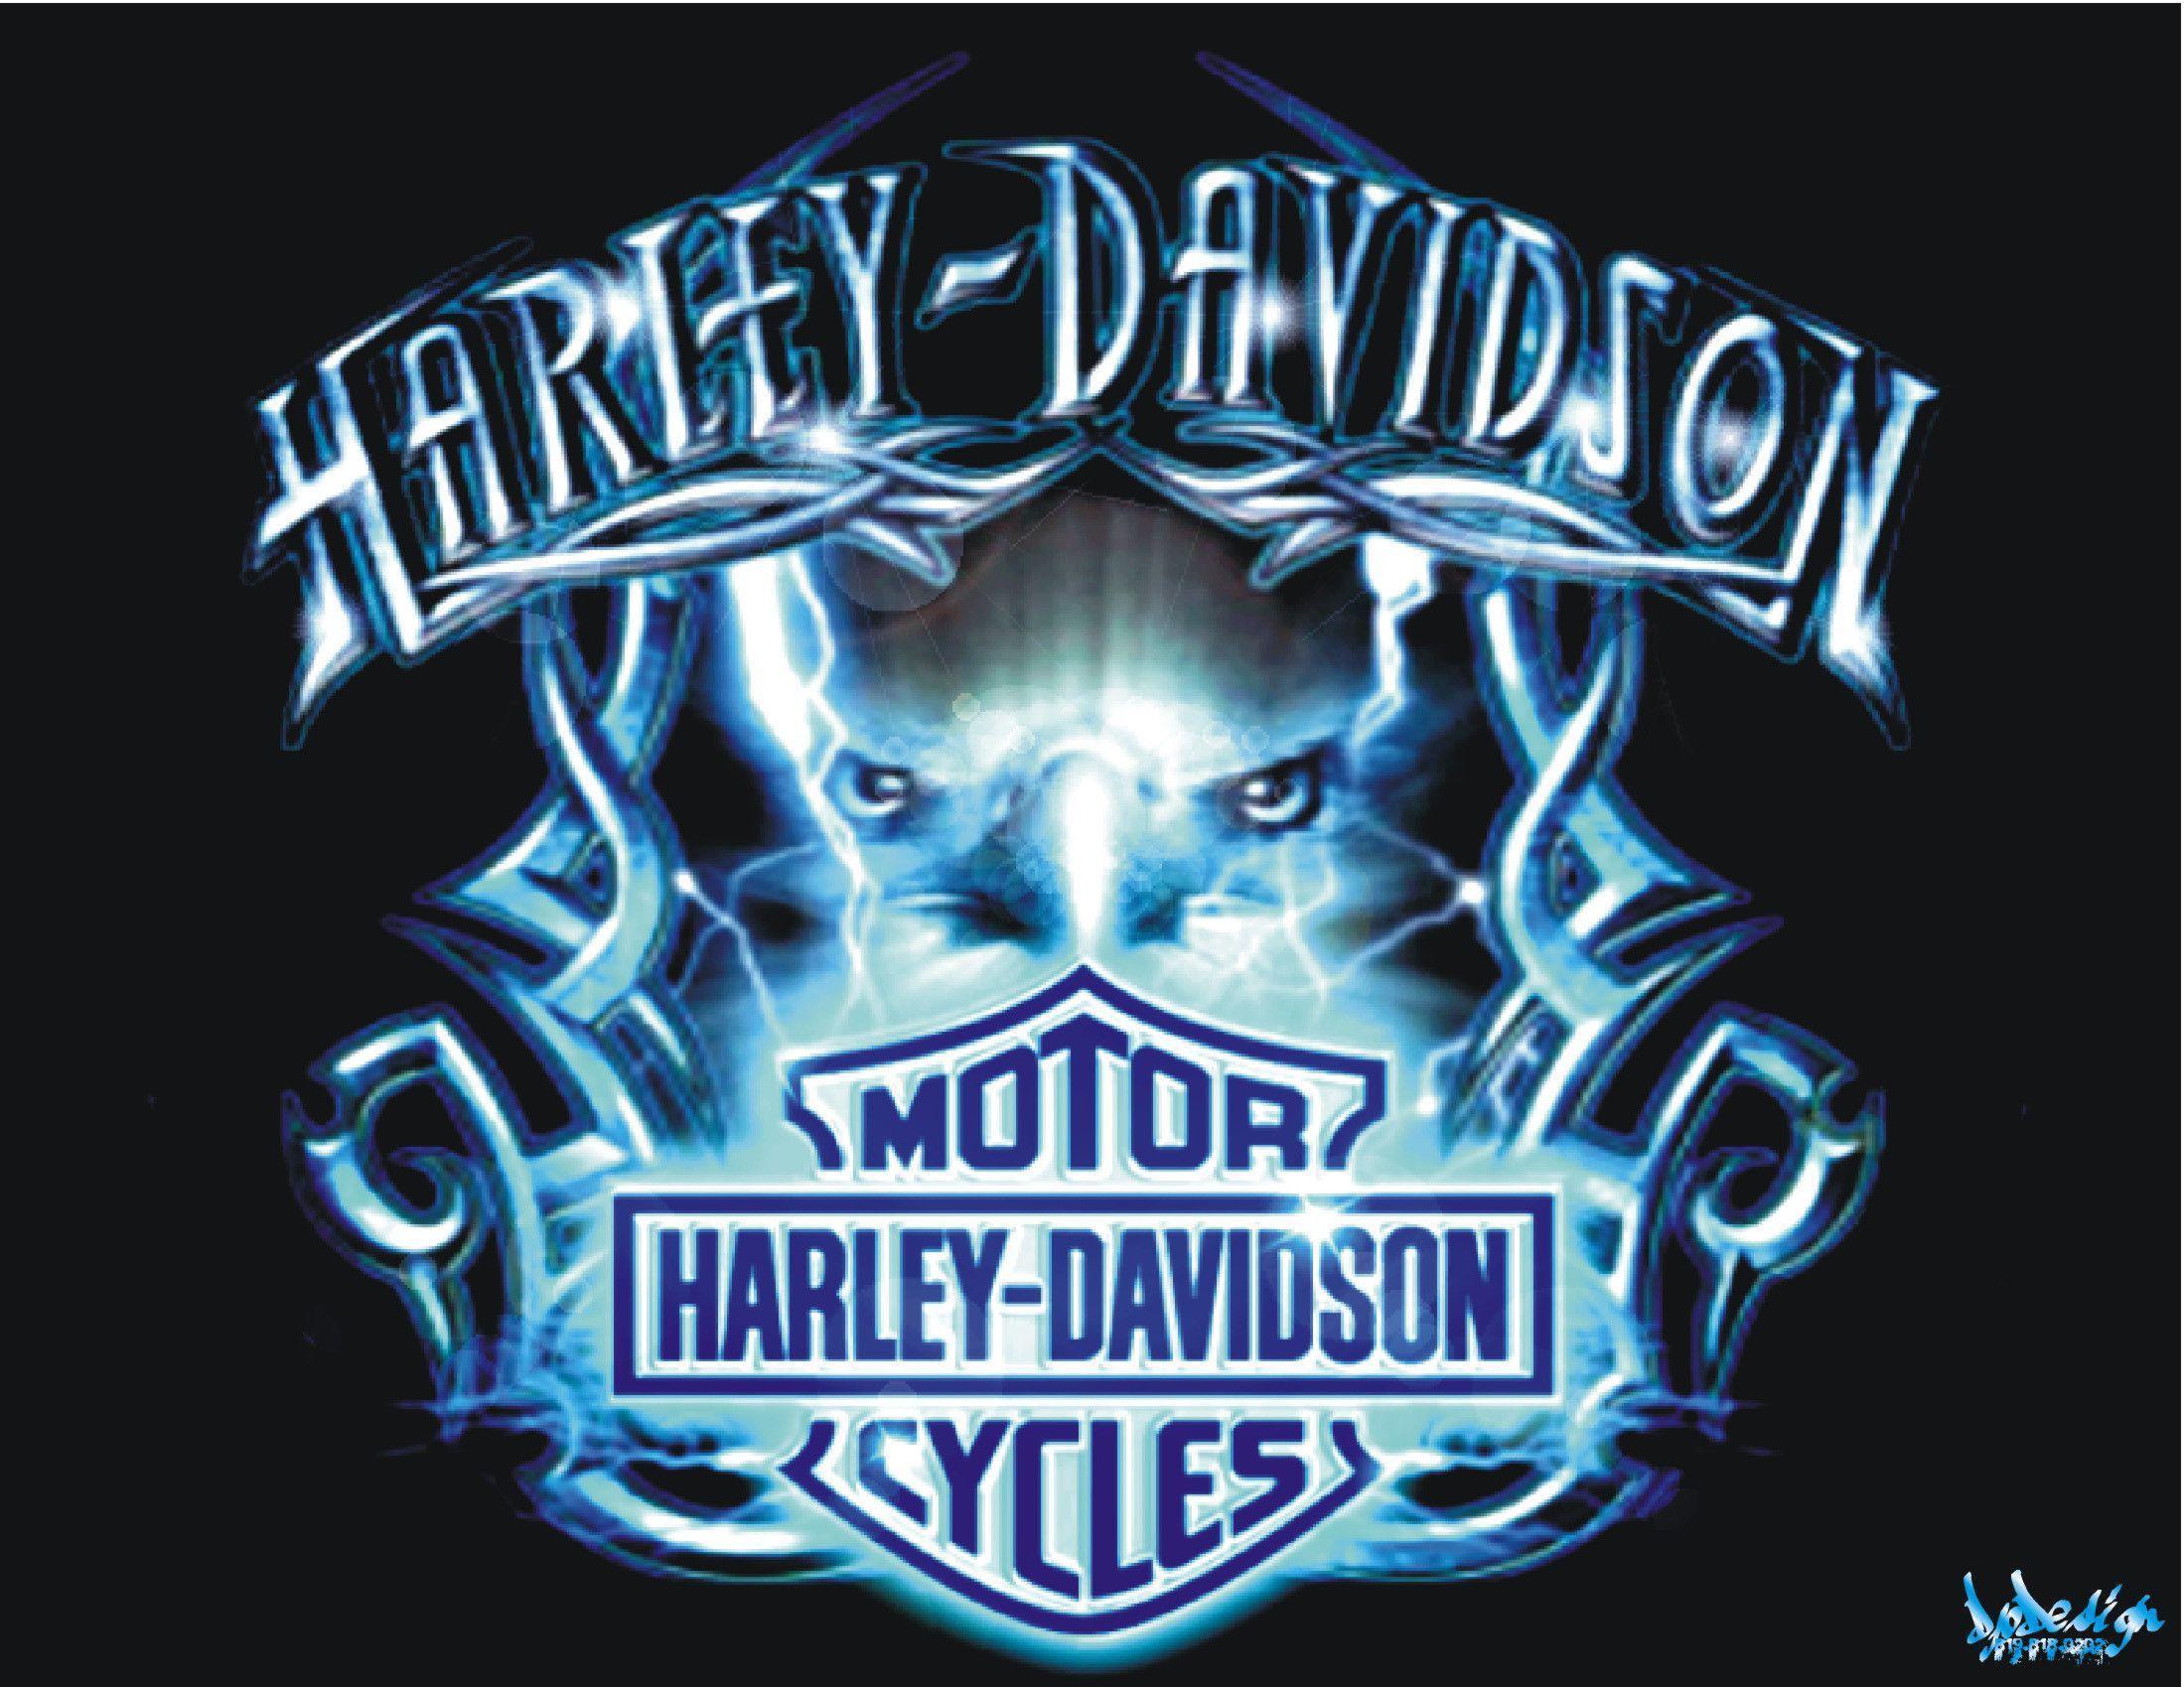 Cool Harley Davidson Logo Wallpaper Images amp Pictures   Becuo 2199x1699